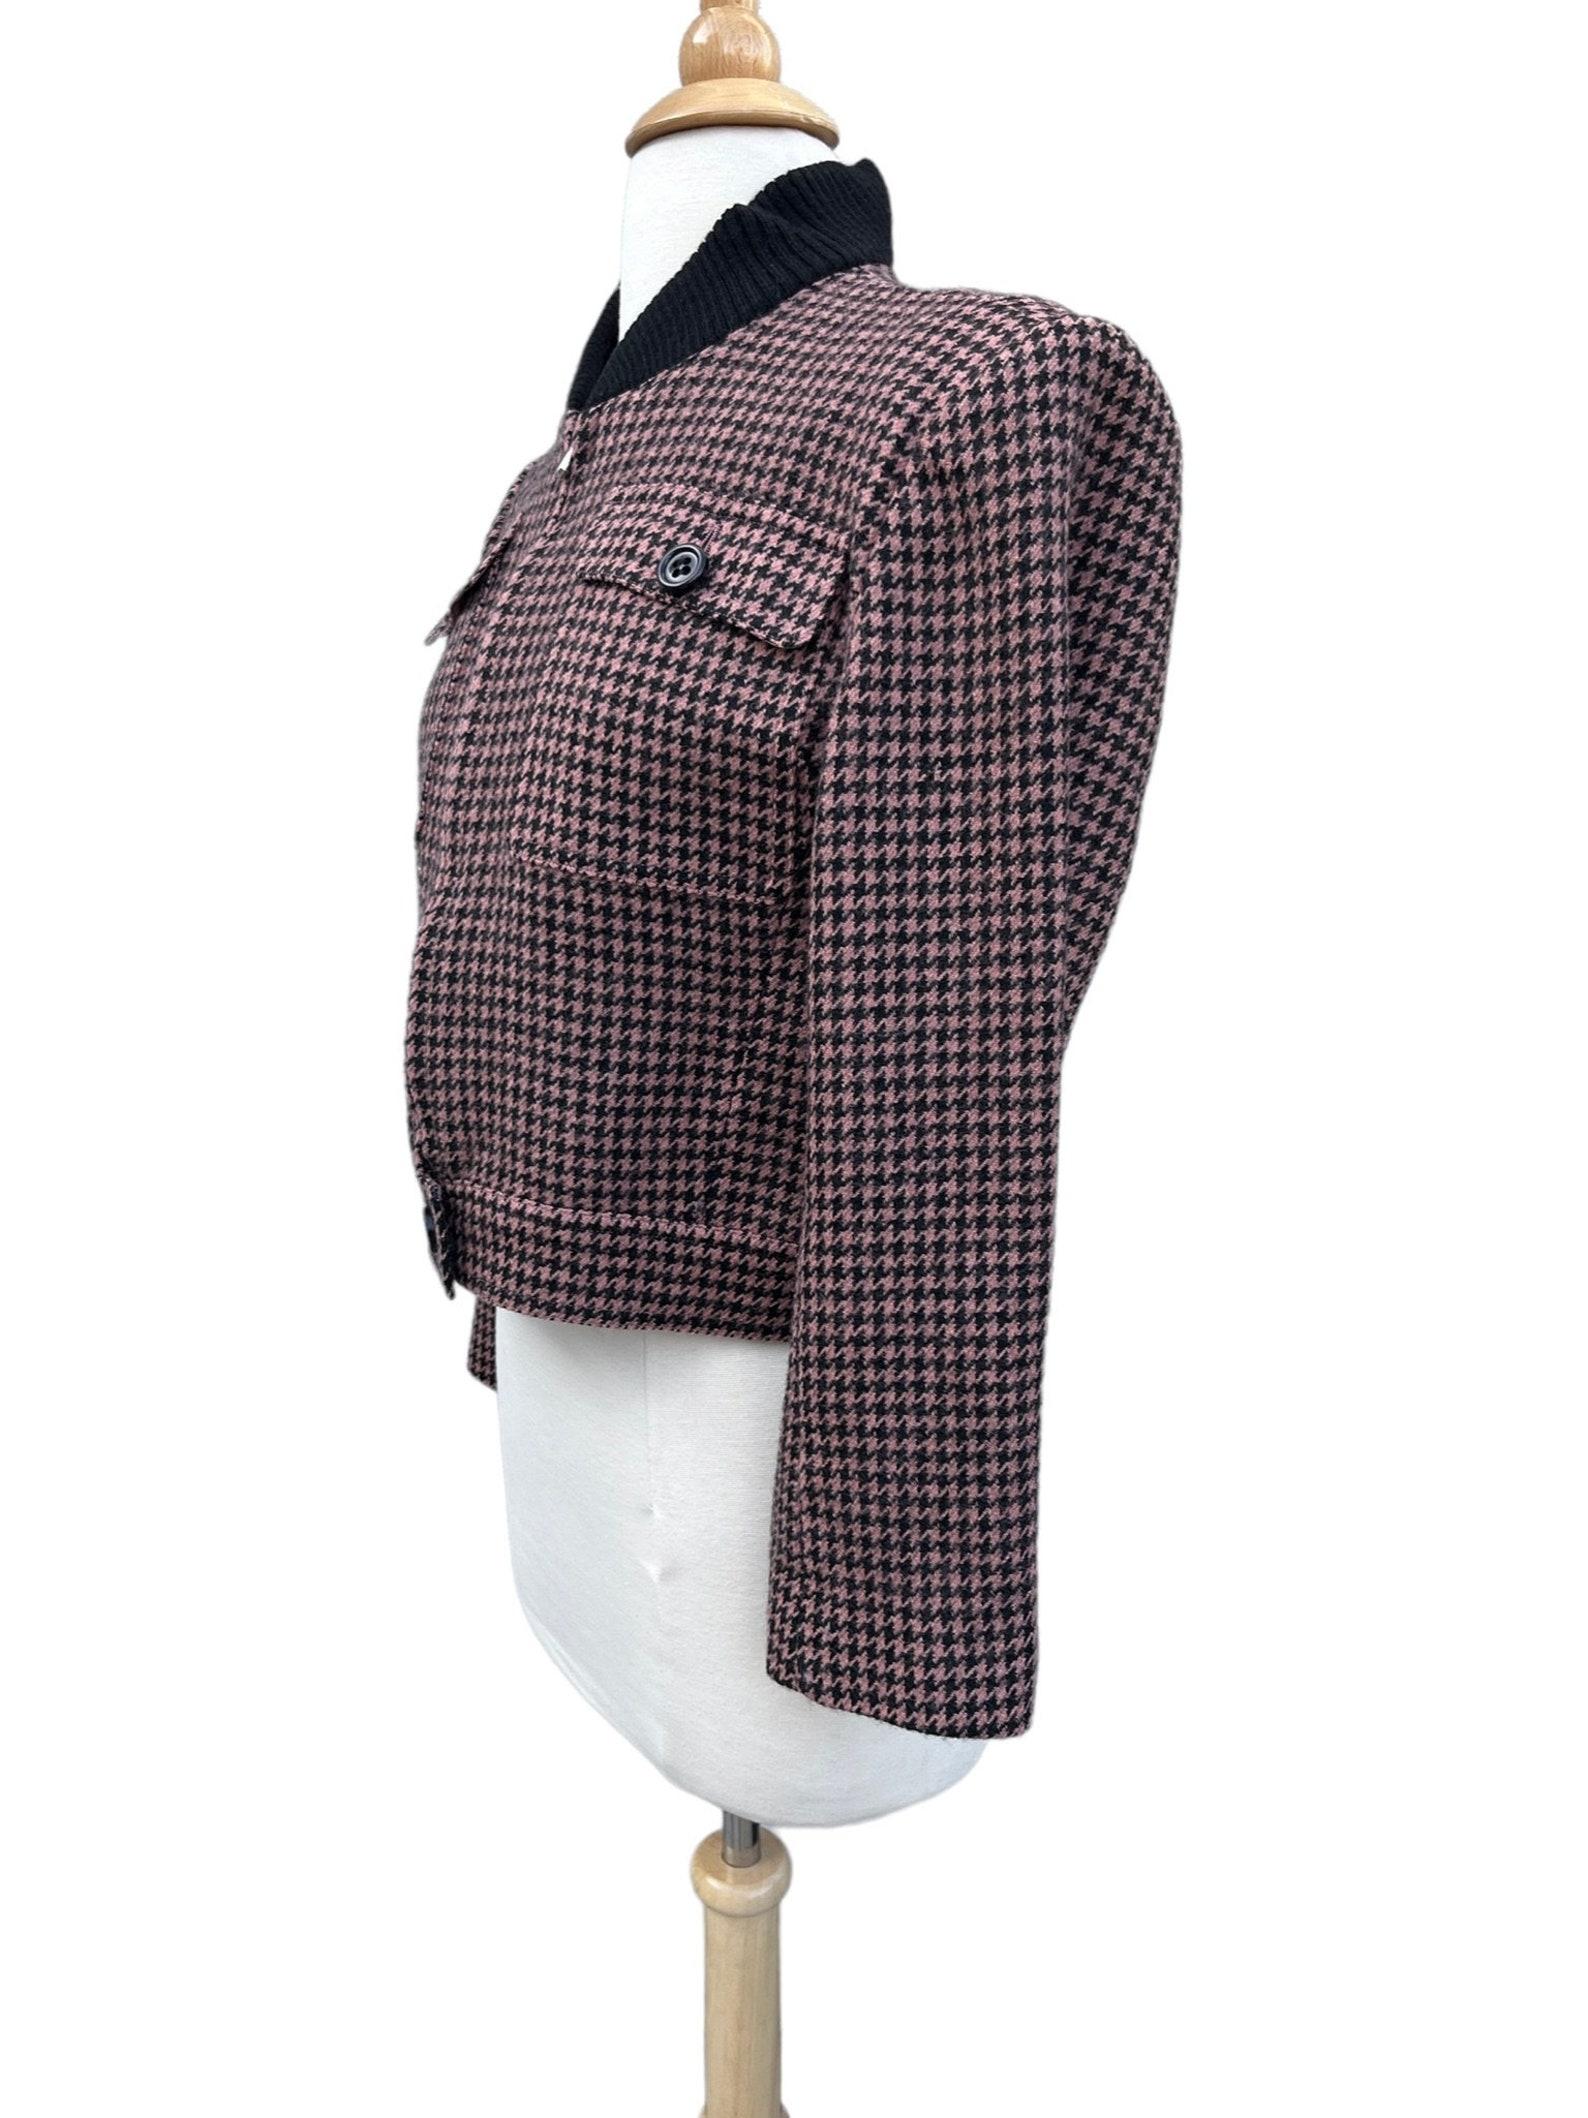 Guy Laroche Houndstooth Jacket, Circa 1980s For Sale 3